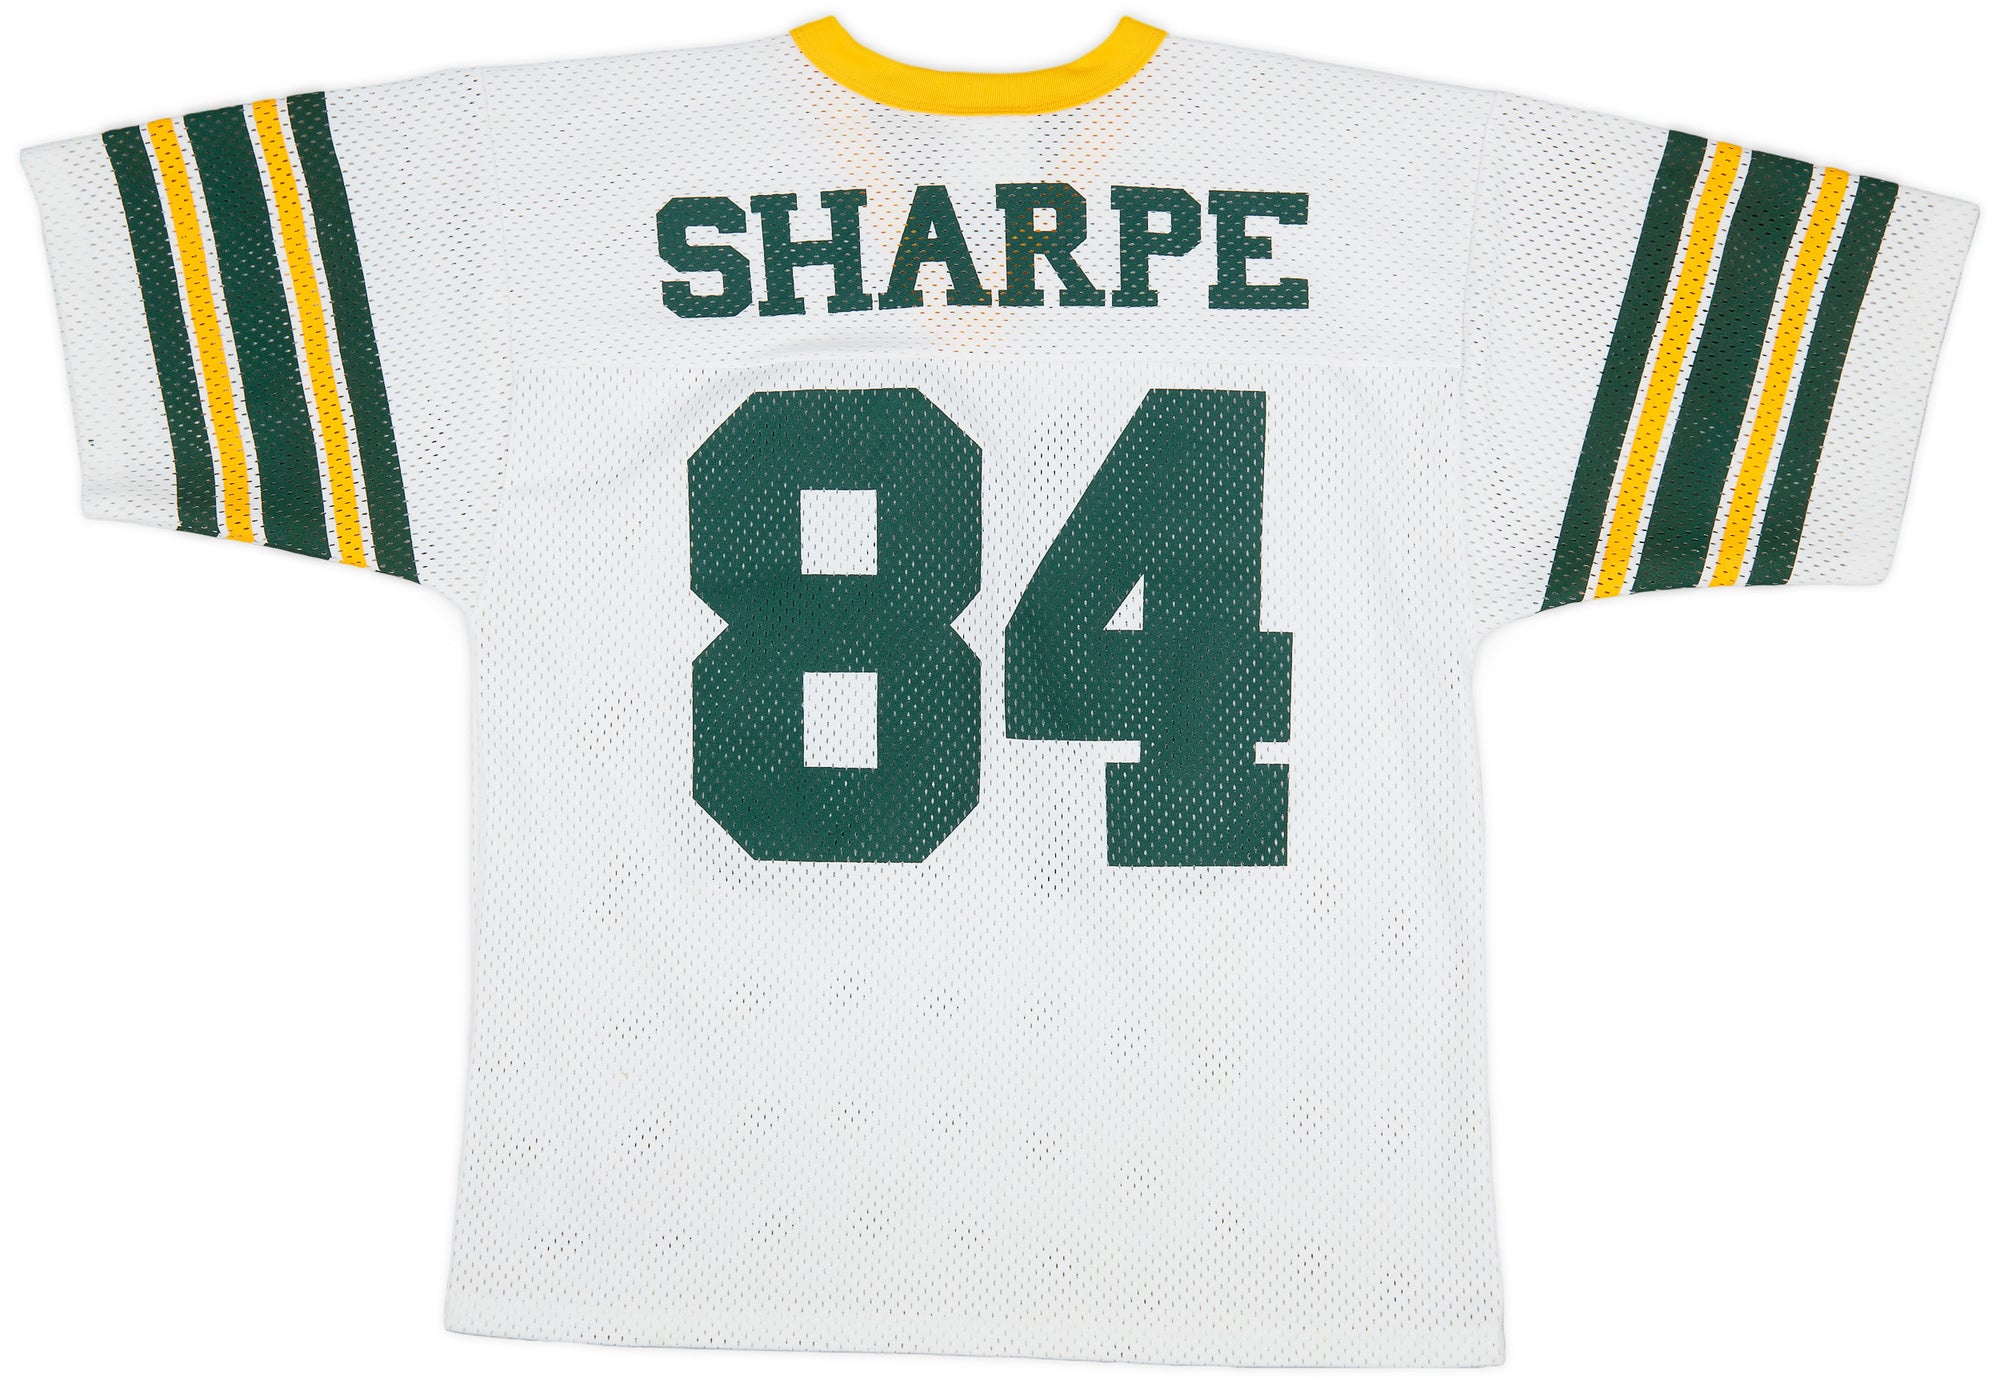 1990-94 GREEN BAY PACKERS SHARPE #84 LOGO ATHLETIC JERSEY (AWAY) M